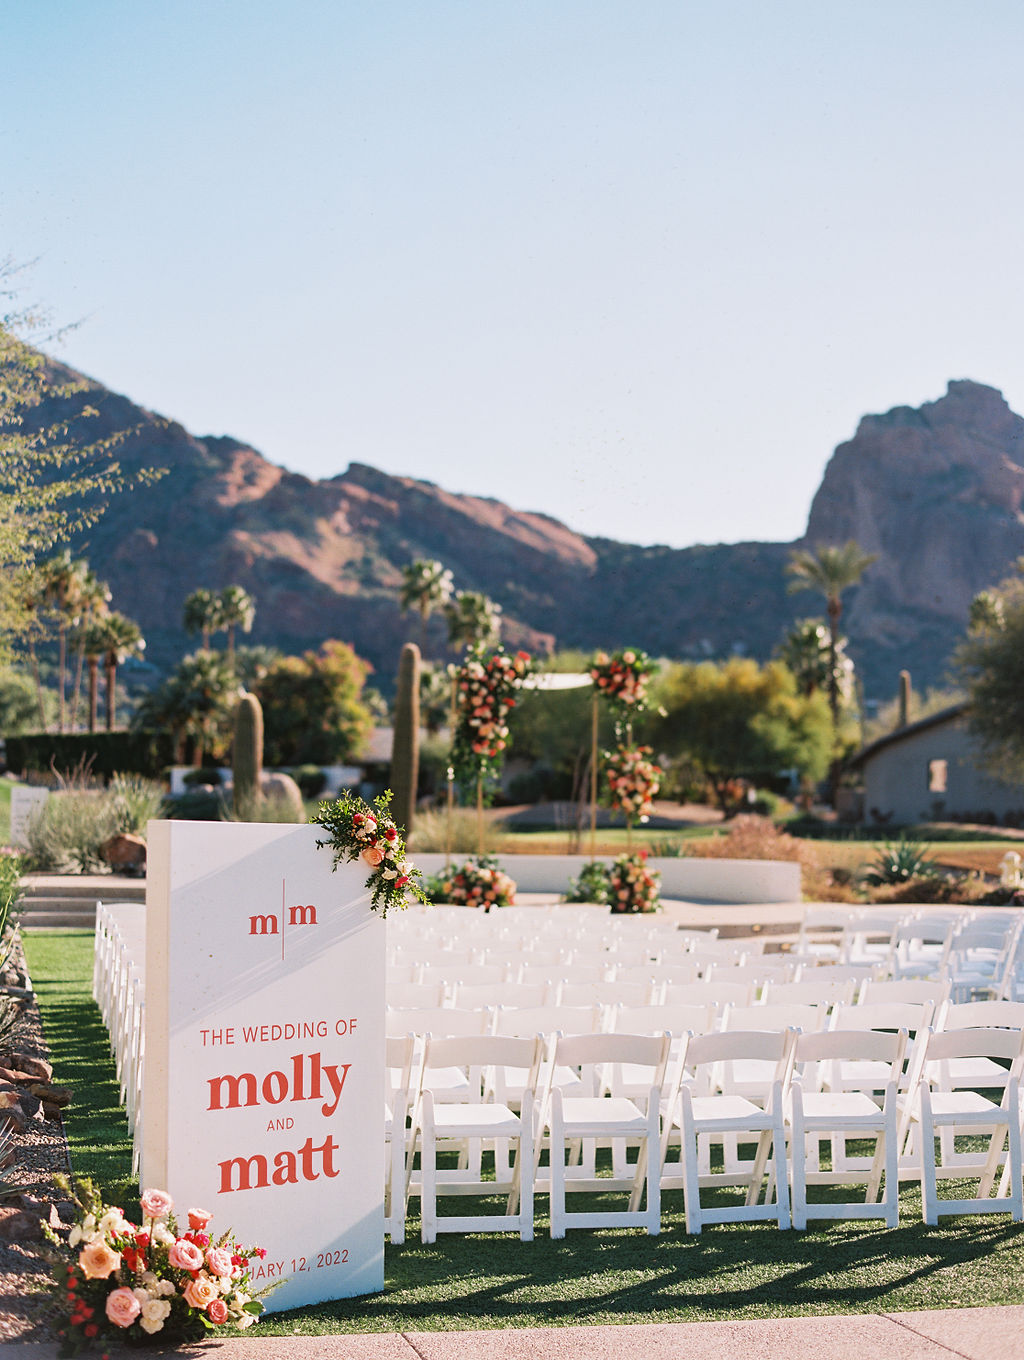 Outdoor wedding ceremony at Mountain Shadows with welcome sign.